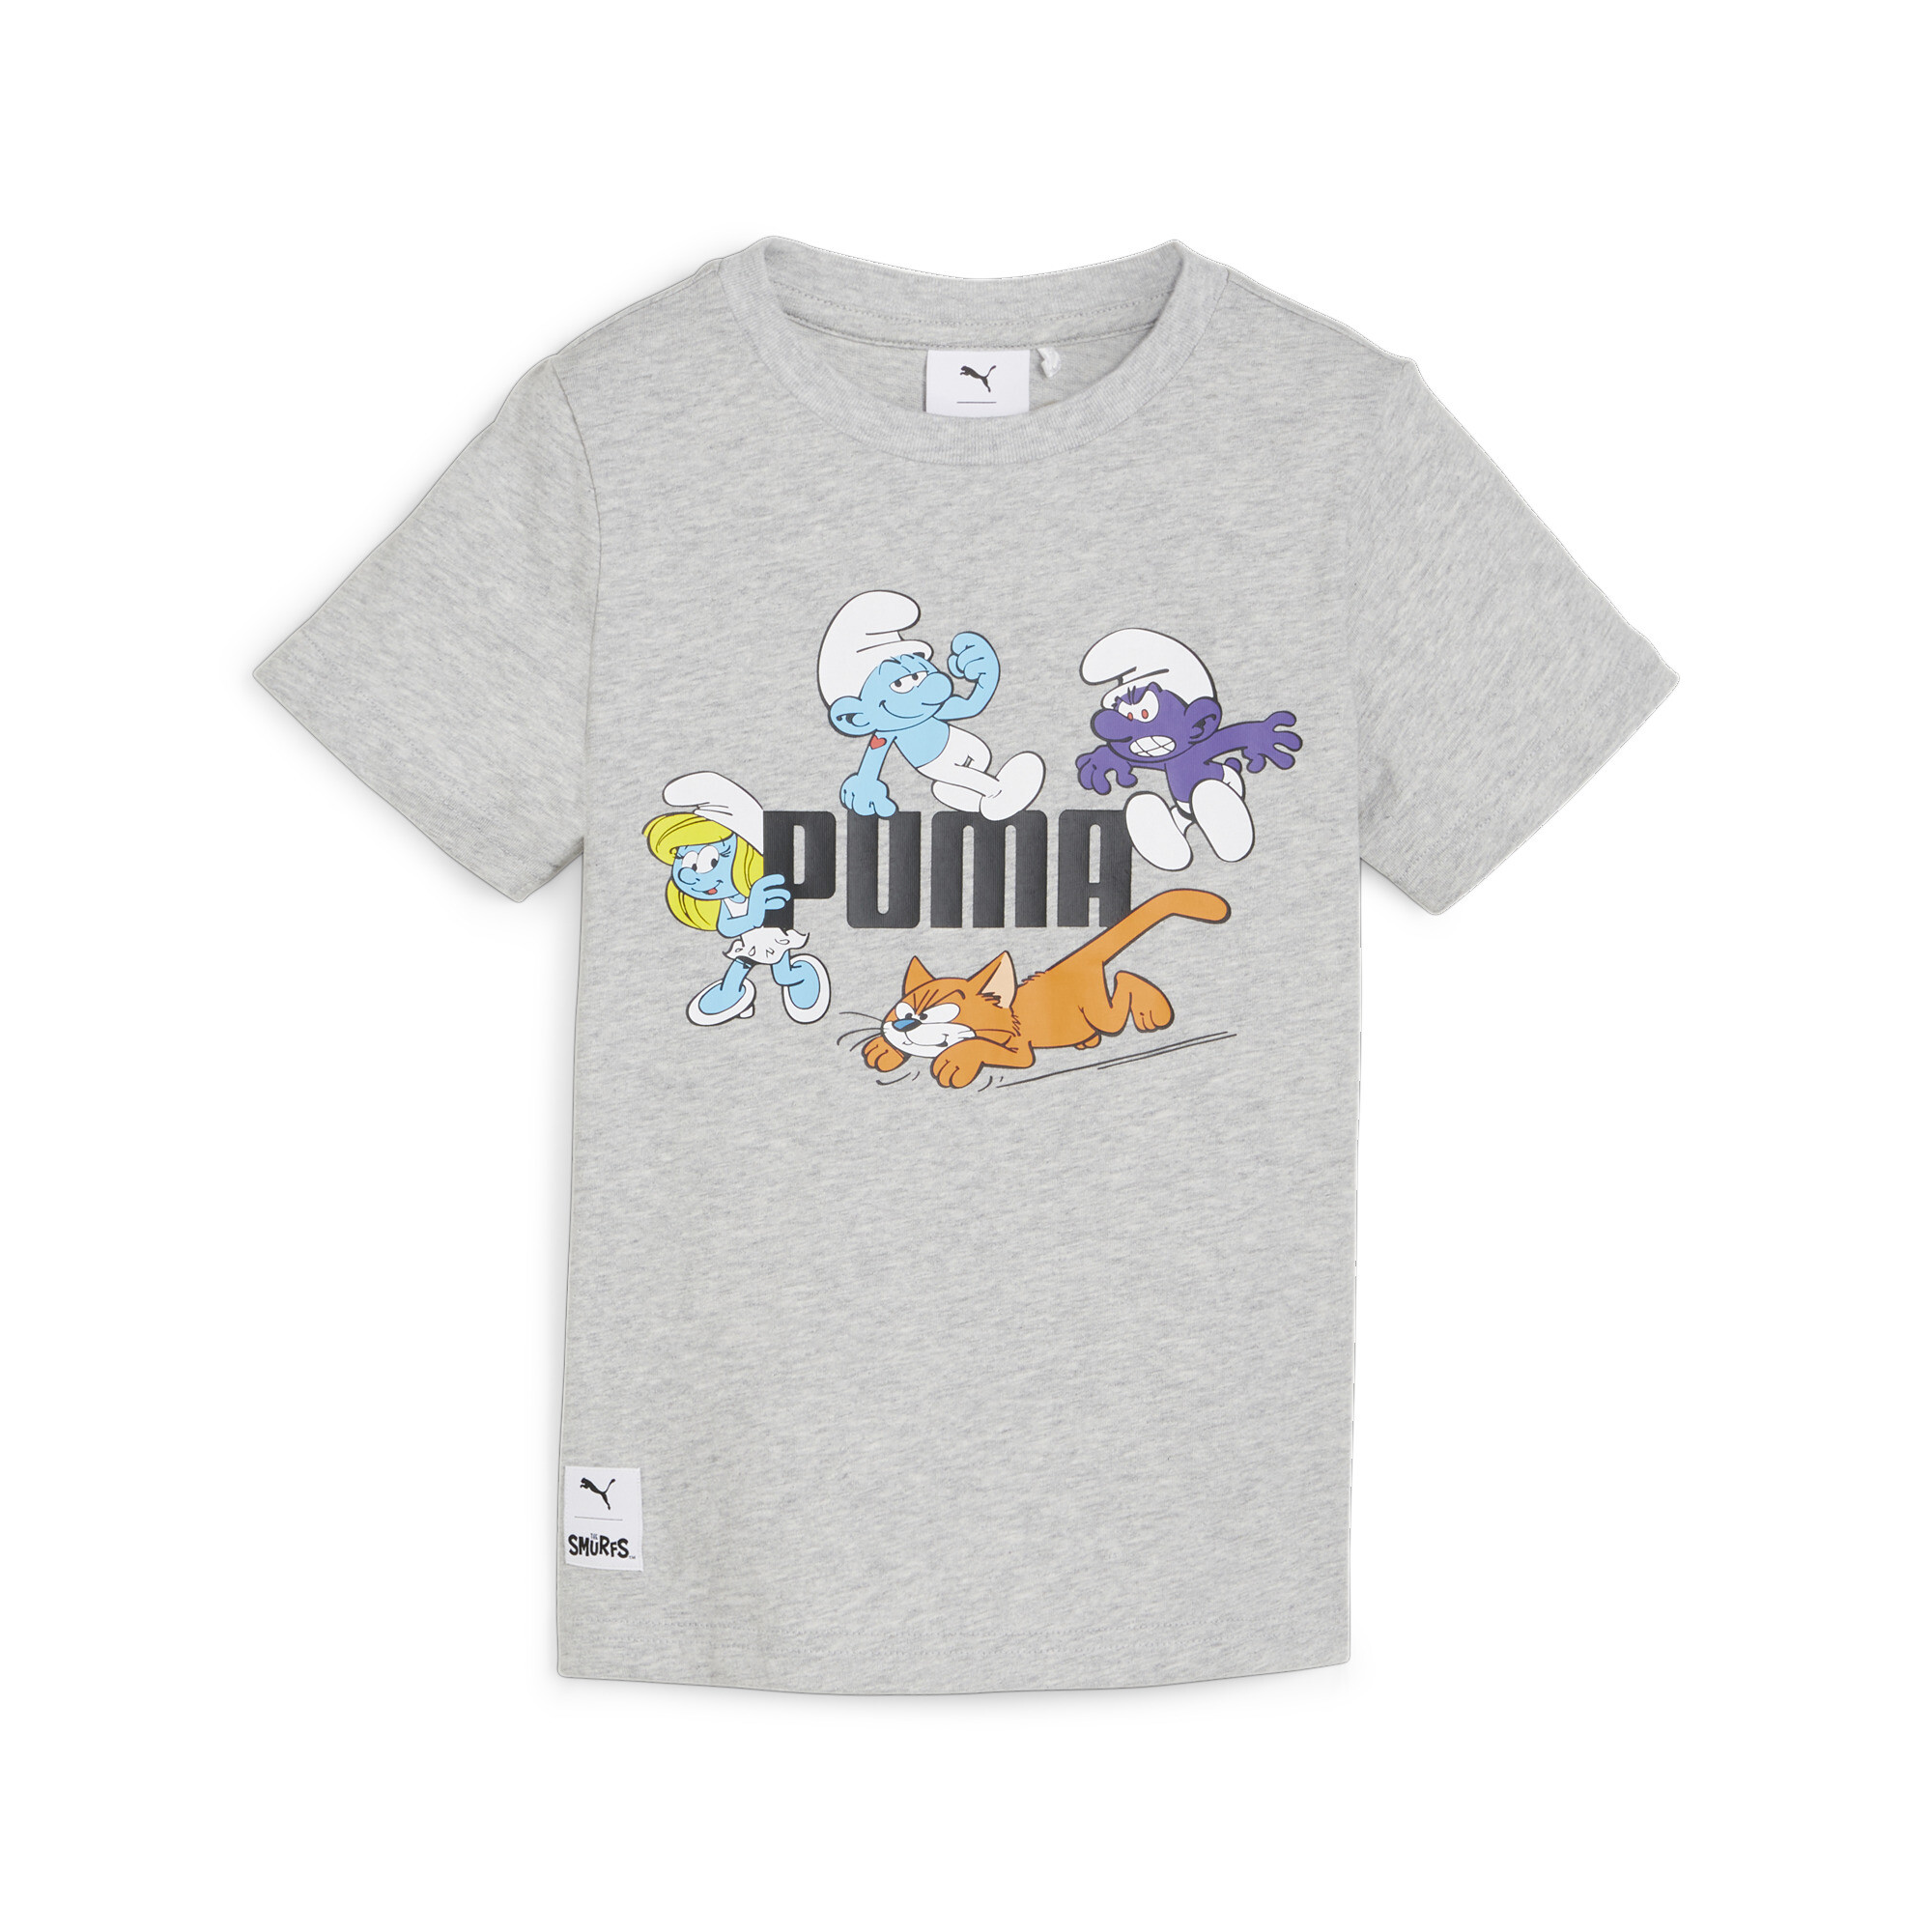 PUMA X THE SMURFS T-Shirt In Heather, Size 11-12 Youth